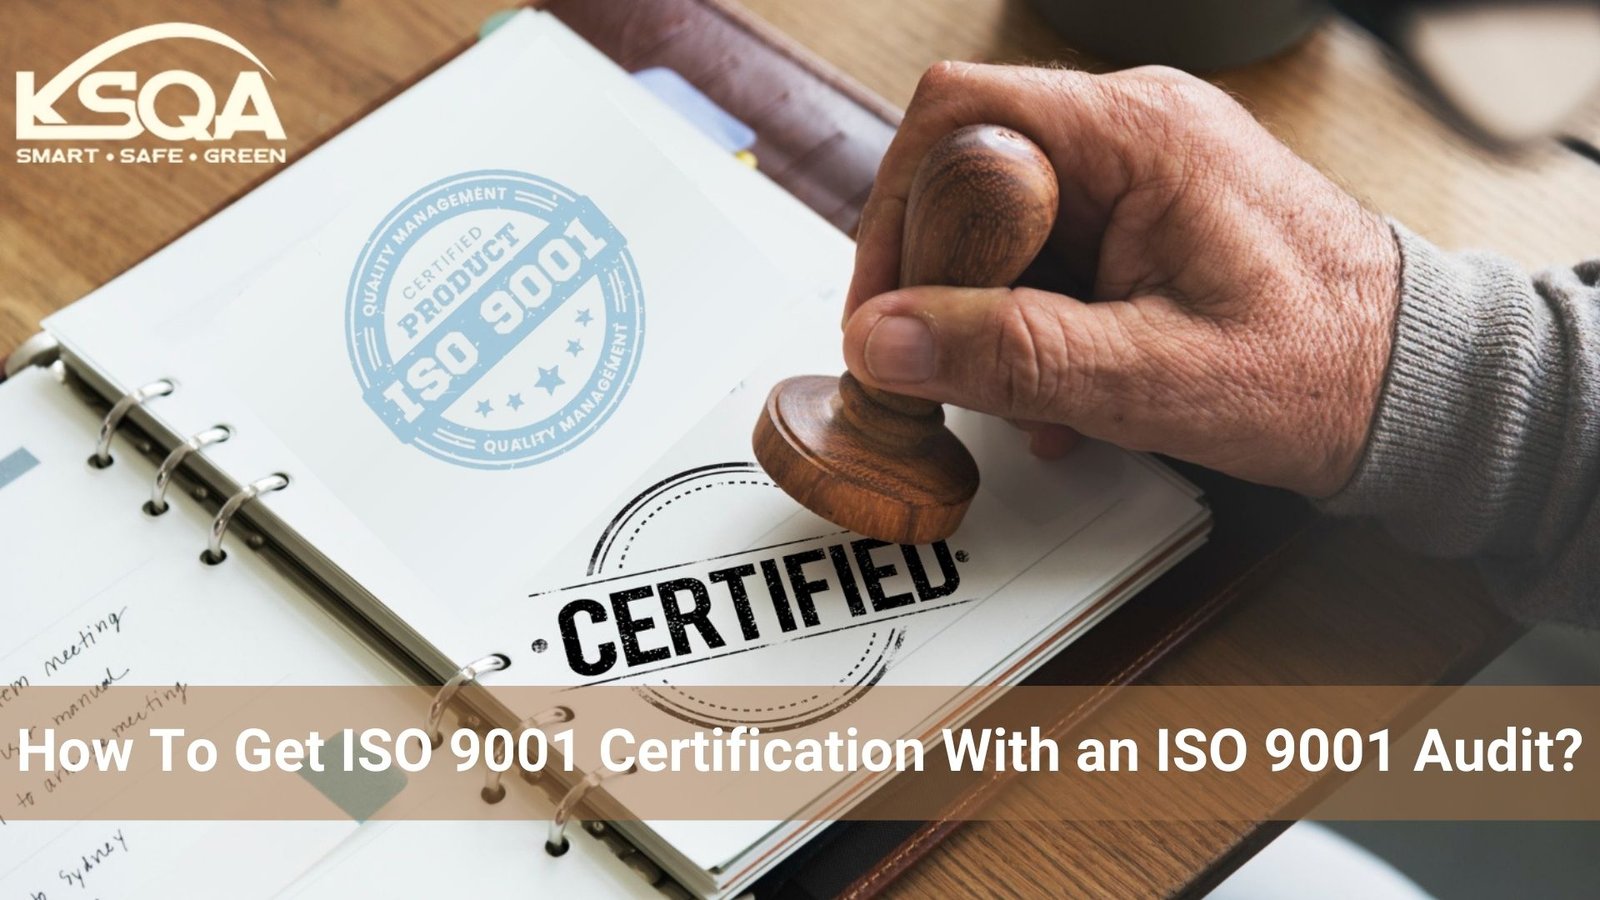 How To Get ISO 9001 Certification With an ISO 9001 Audit?